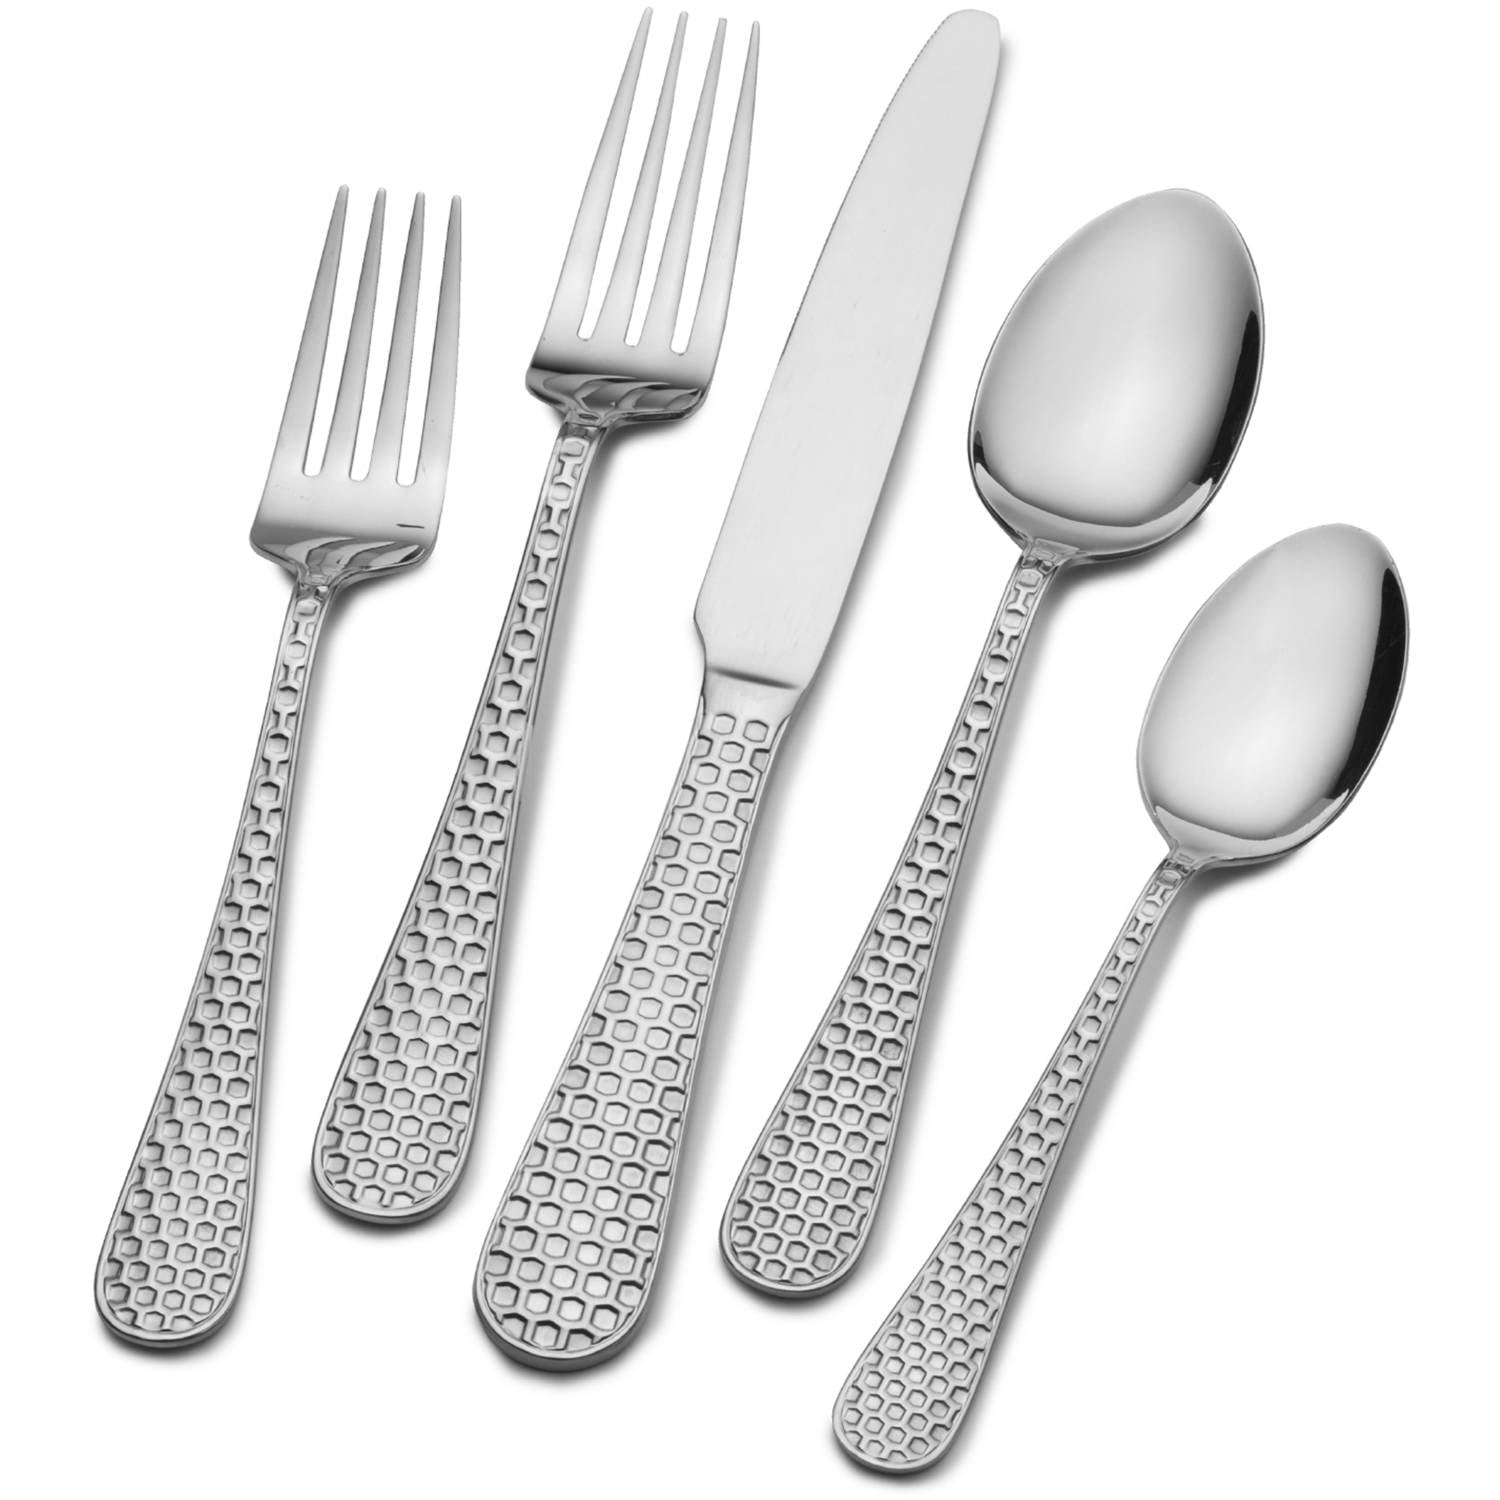 Service for 4 International Silver 5200978 Honeycomb 20-Piece Stainless Steel Flatware Set 